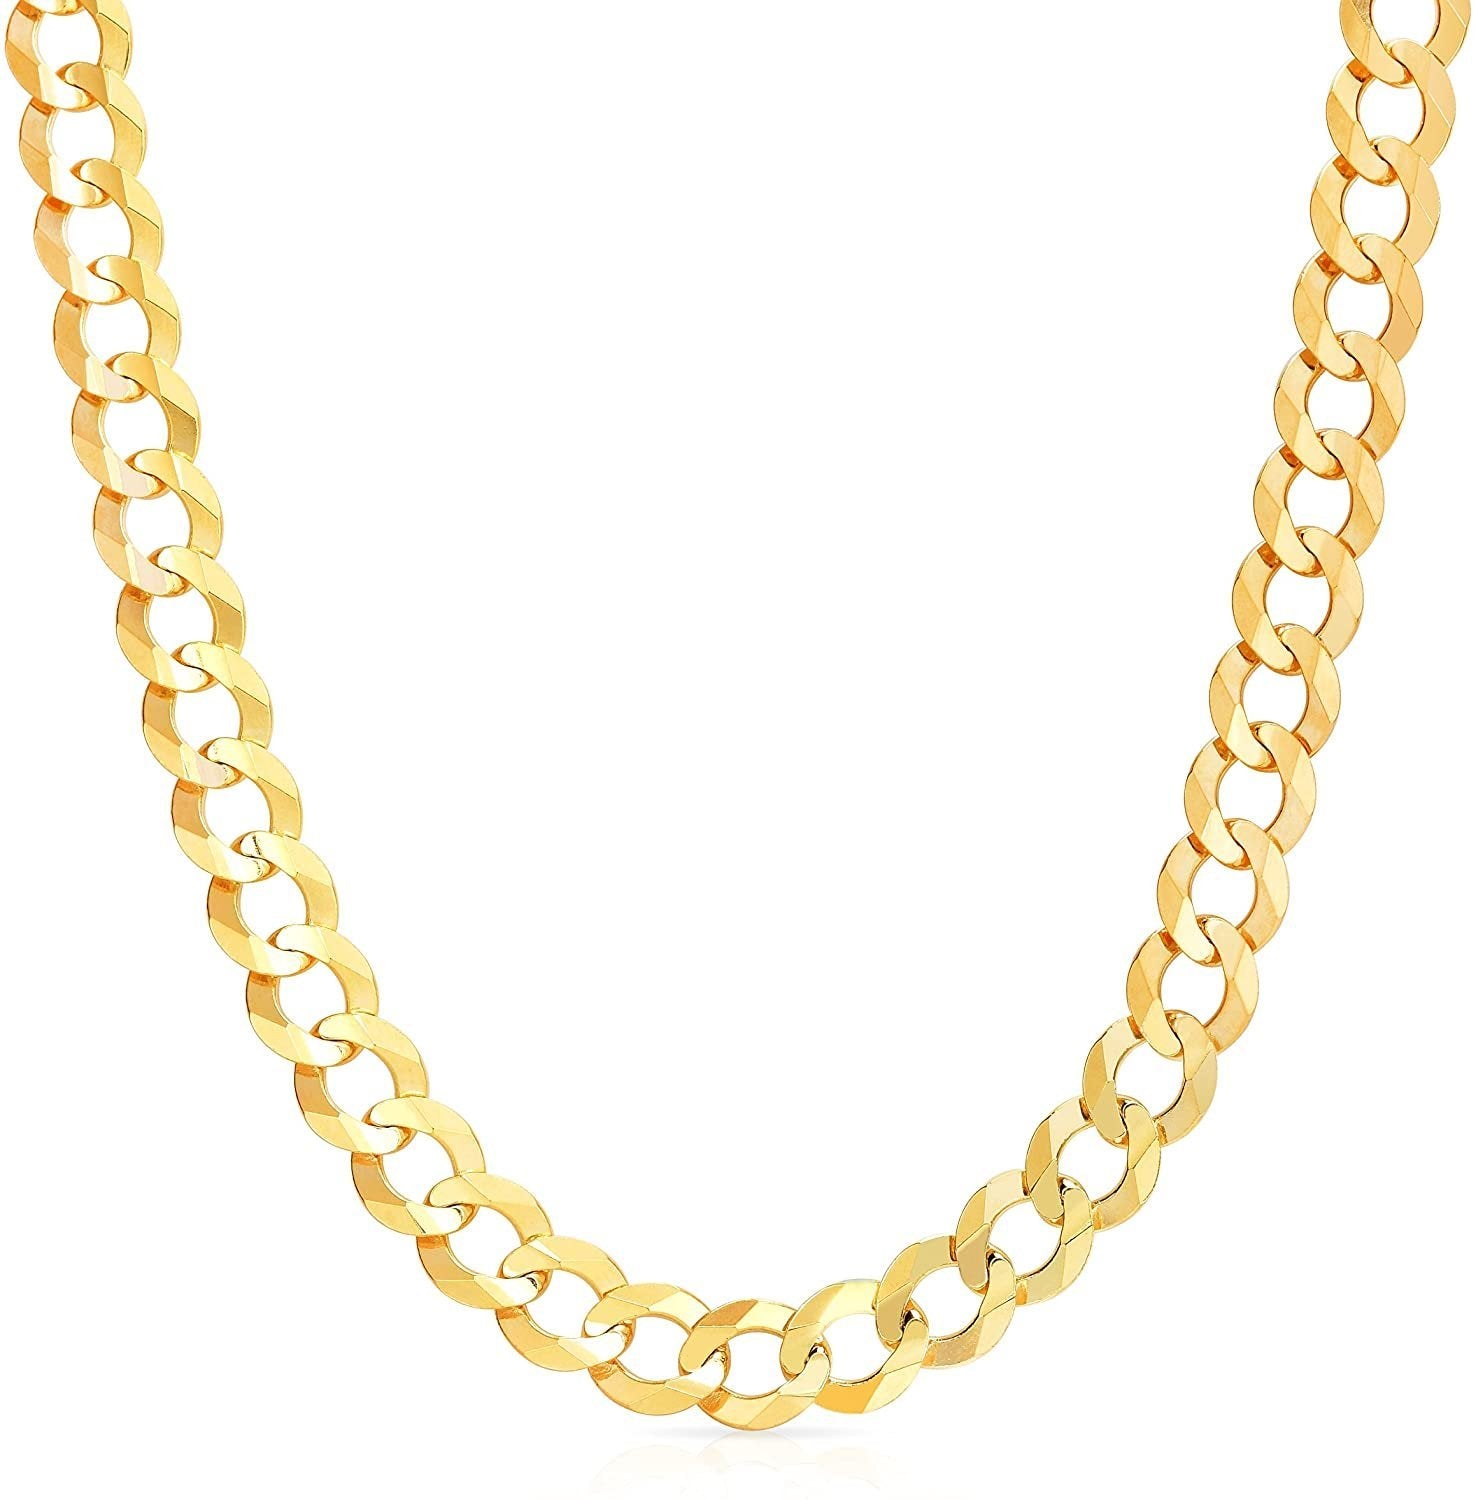 10k Yellow Gold Mens Thick Solid Curb Cuban Link Chain Necklace, 0.4 Inch (10mm)